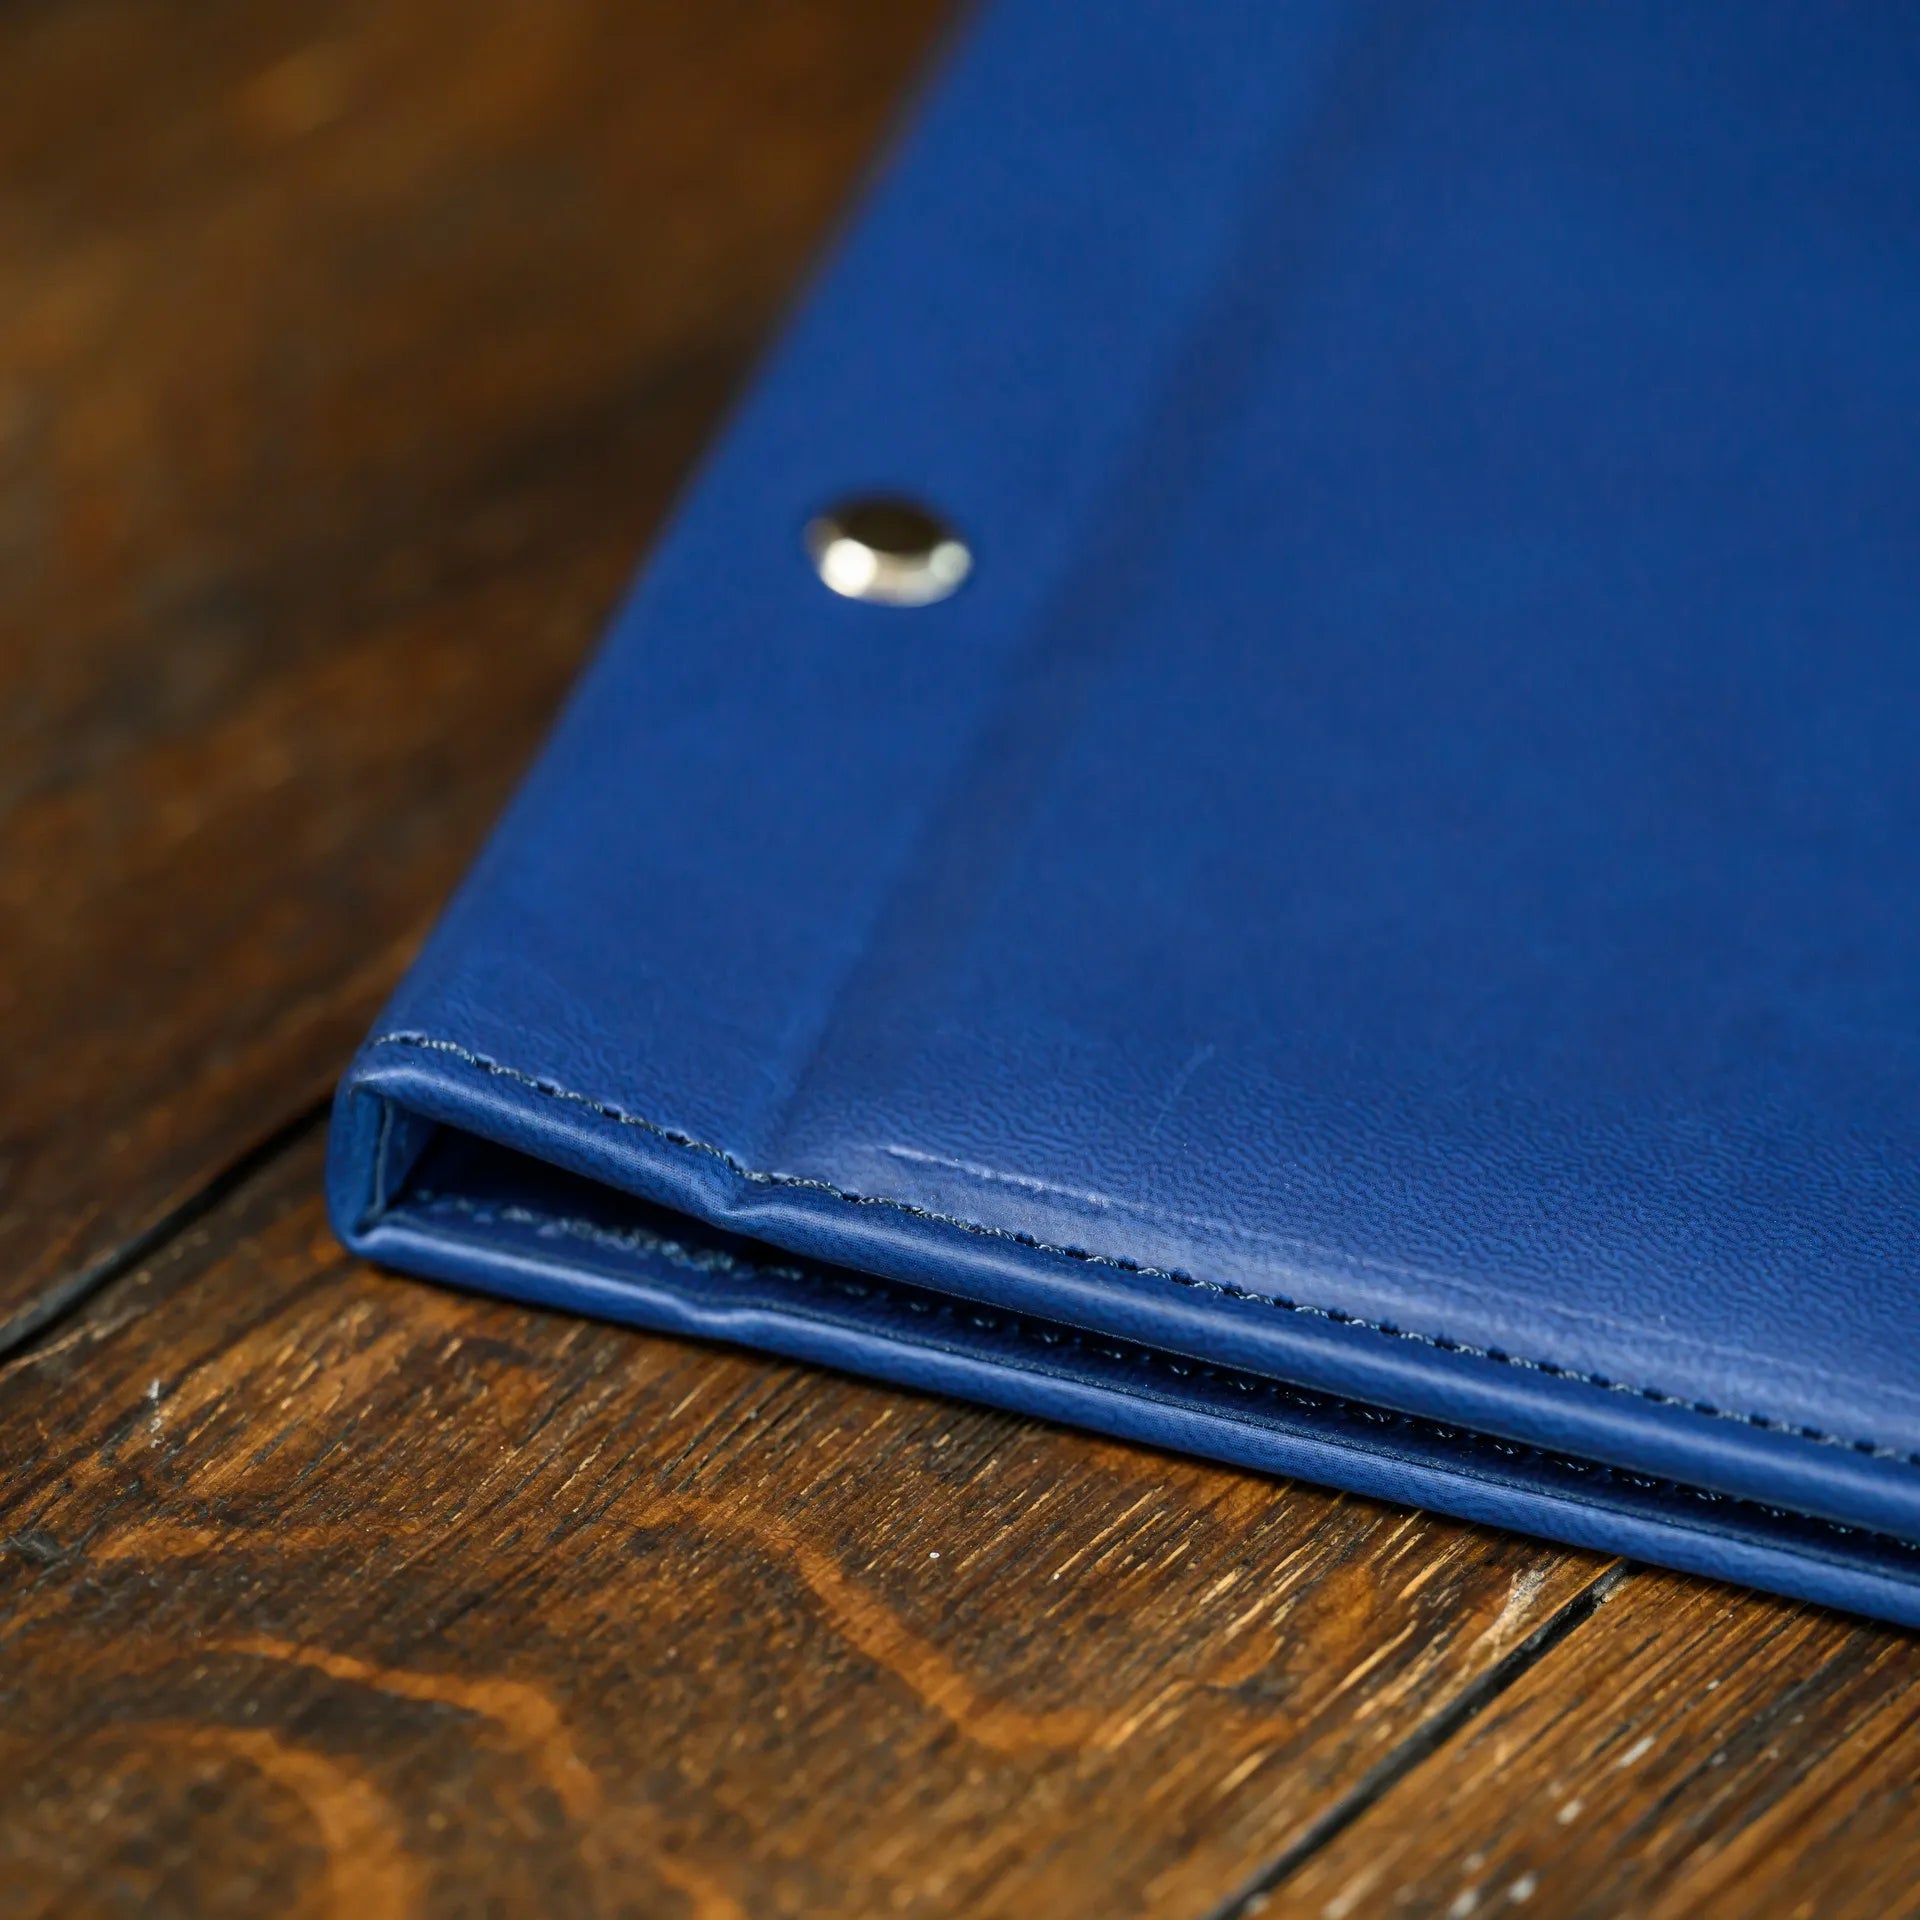 Sturdy Menu Folder with Fixing by Screws and Plank, offering durability and reliability, ensuring menus stay in place and pristine.